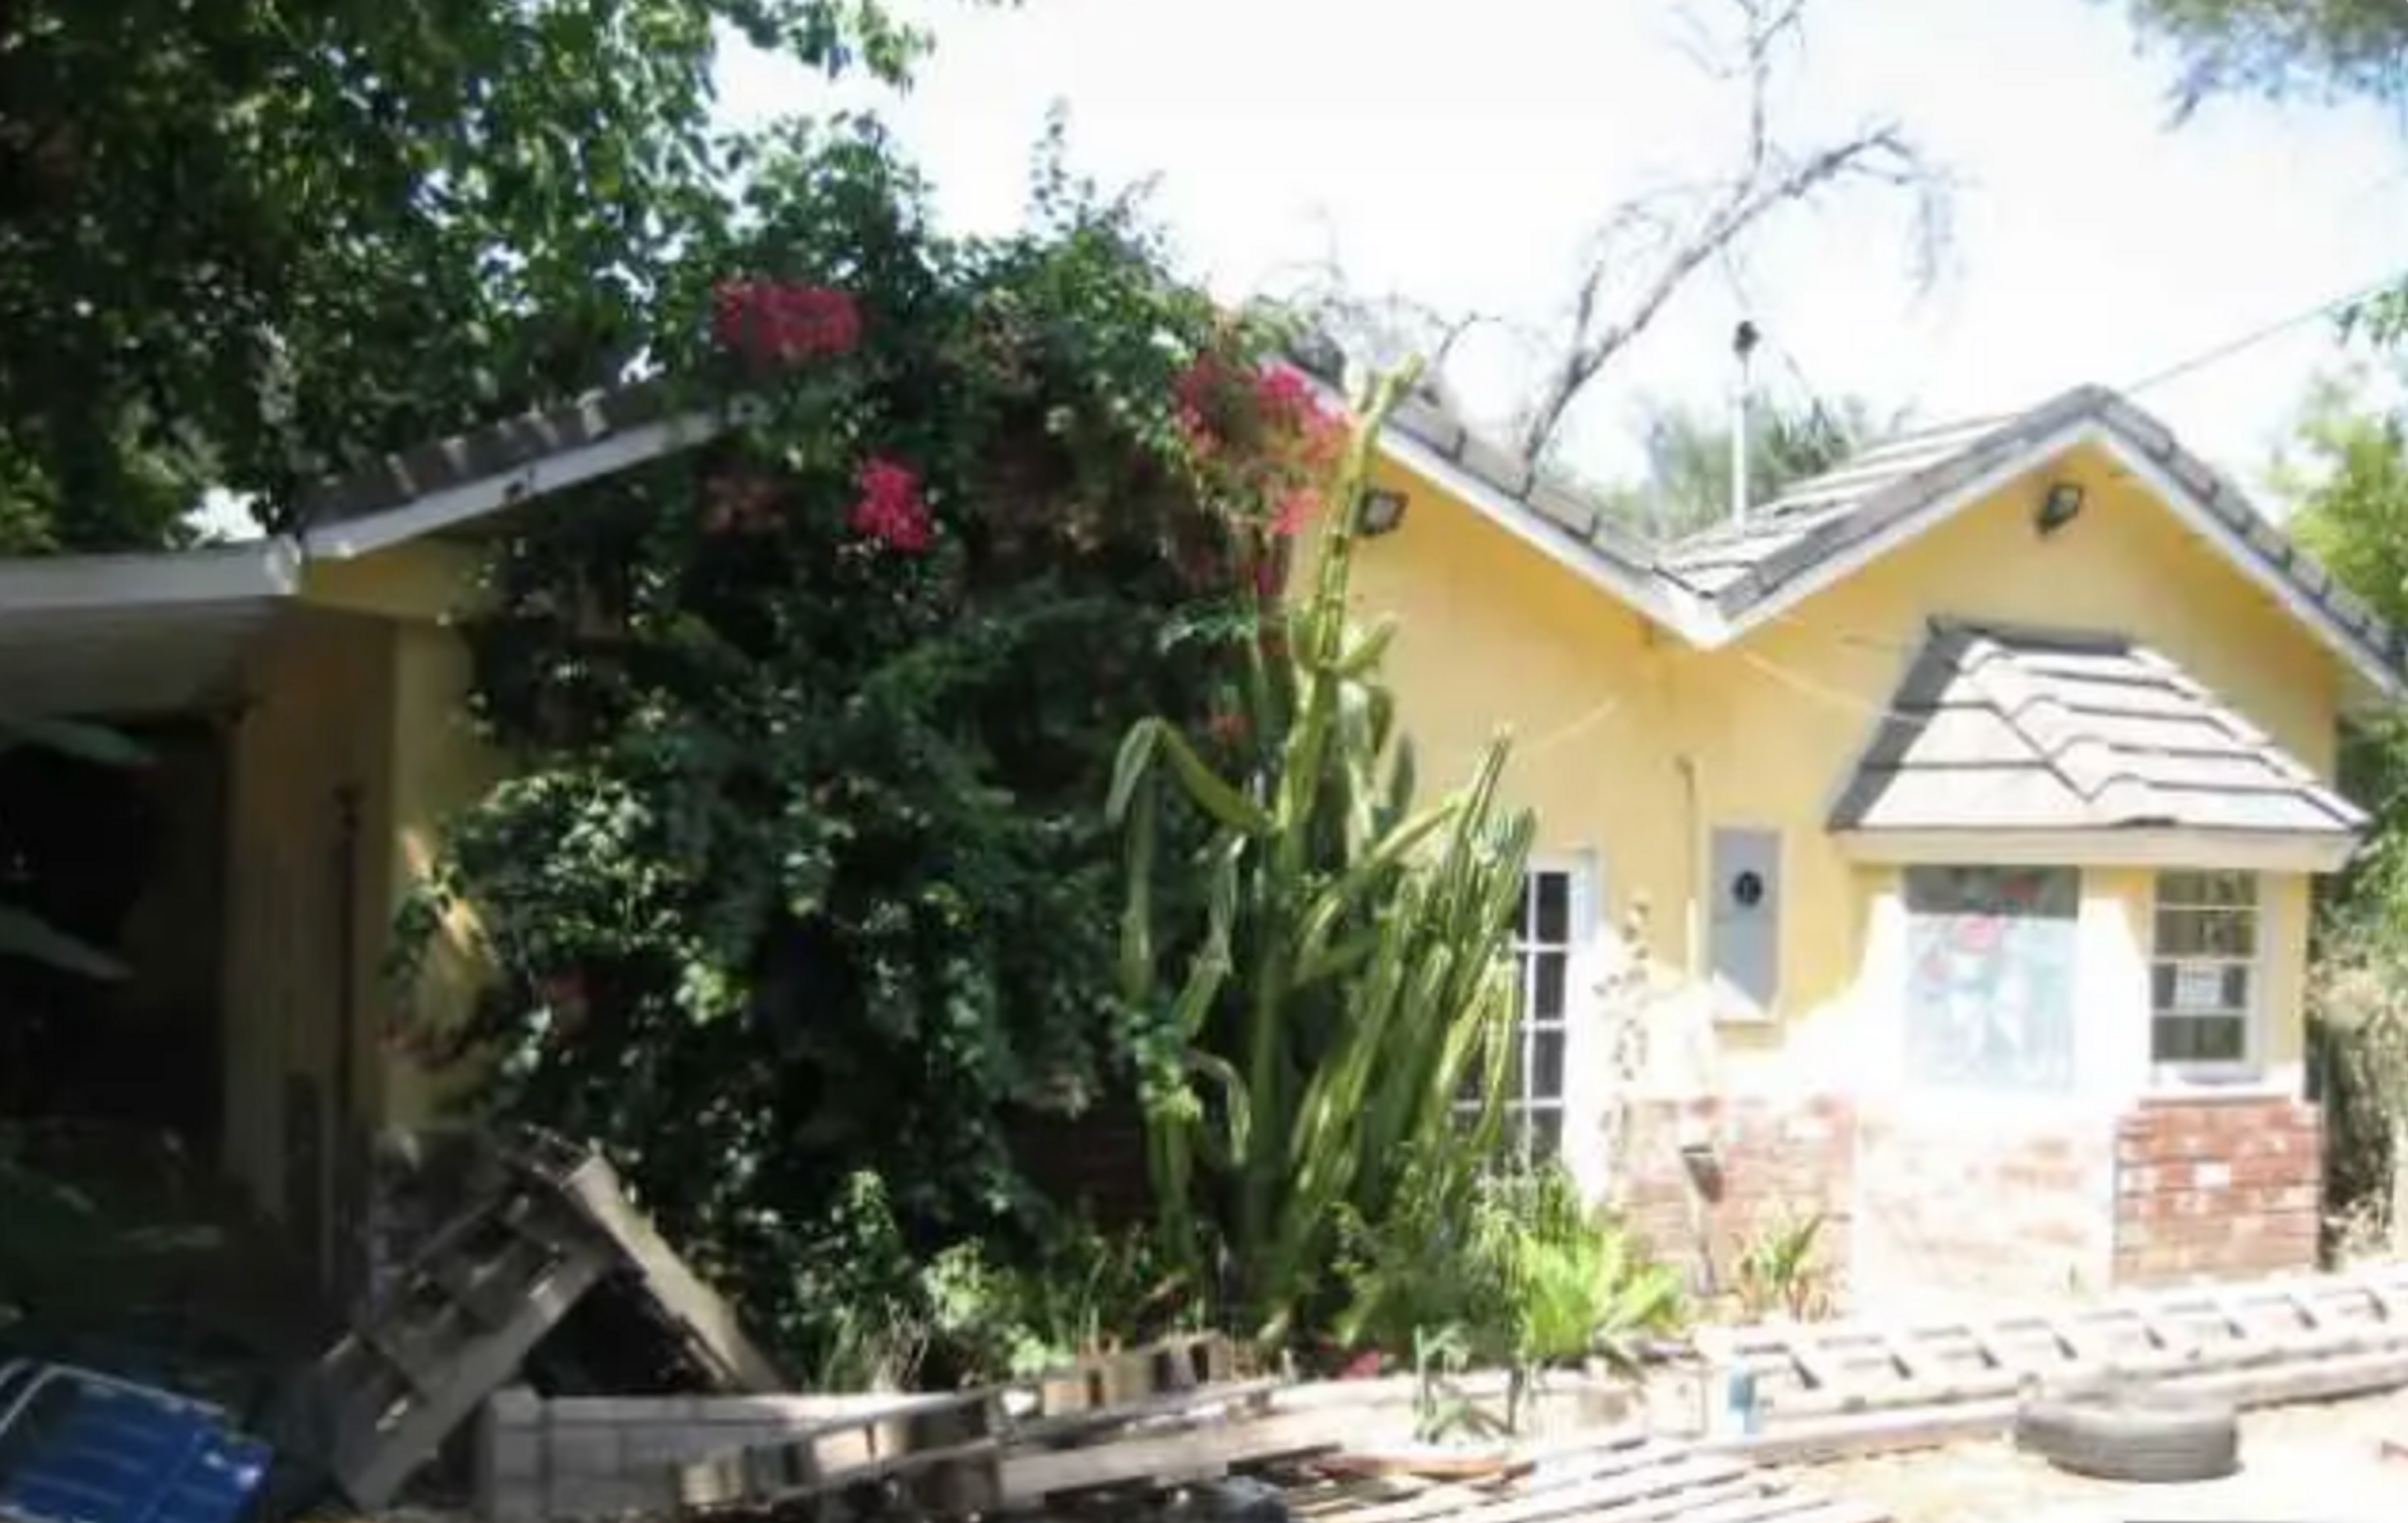 A yellow ranch house with overgrown plants and debris in the yard.